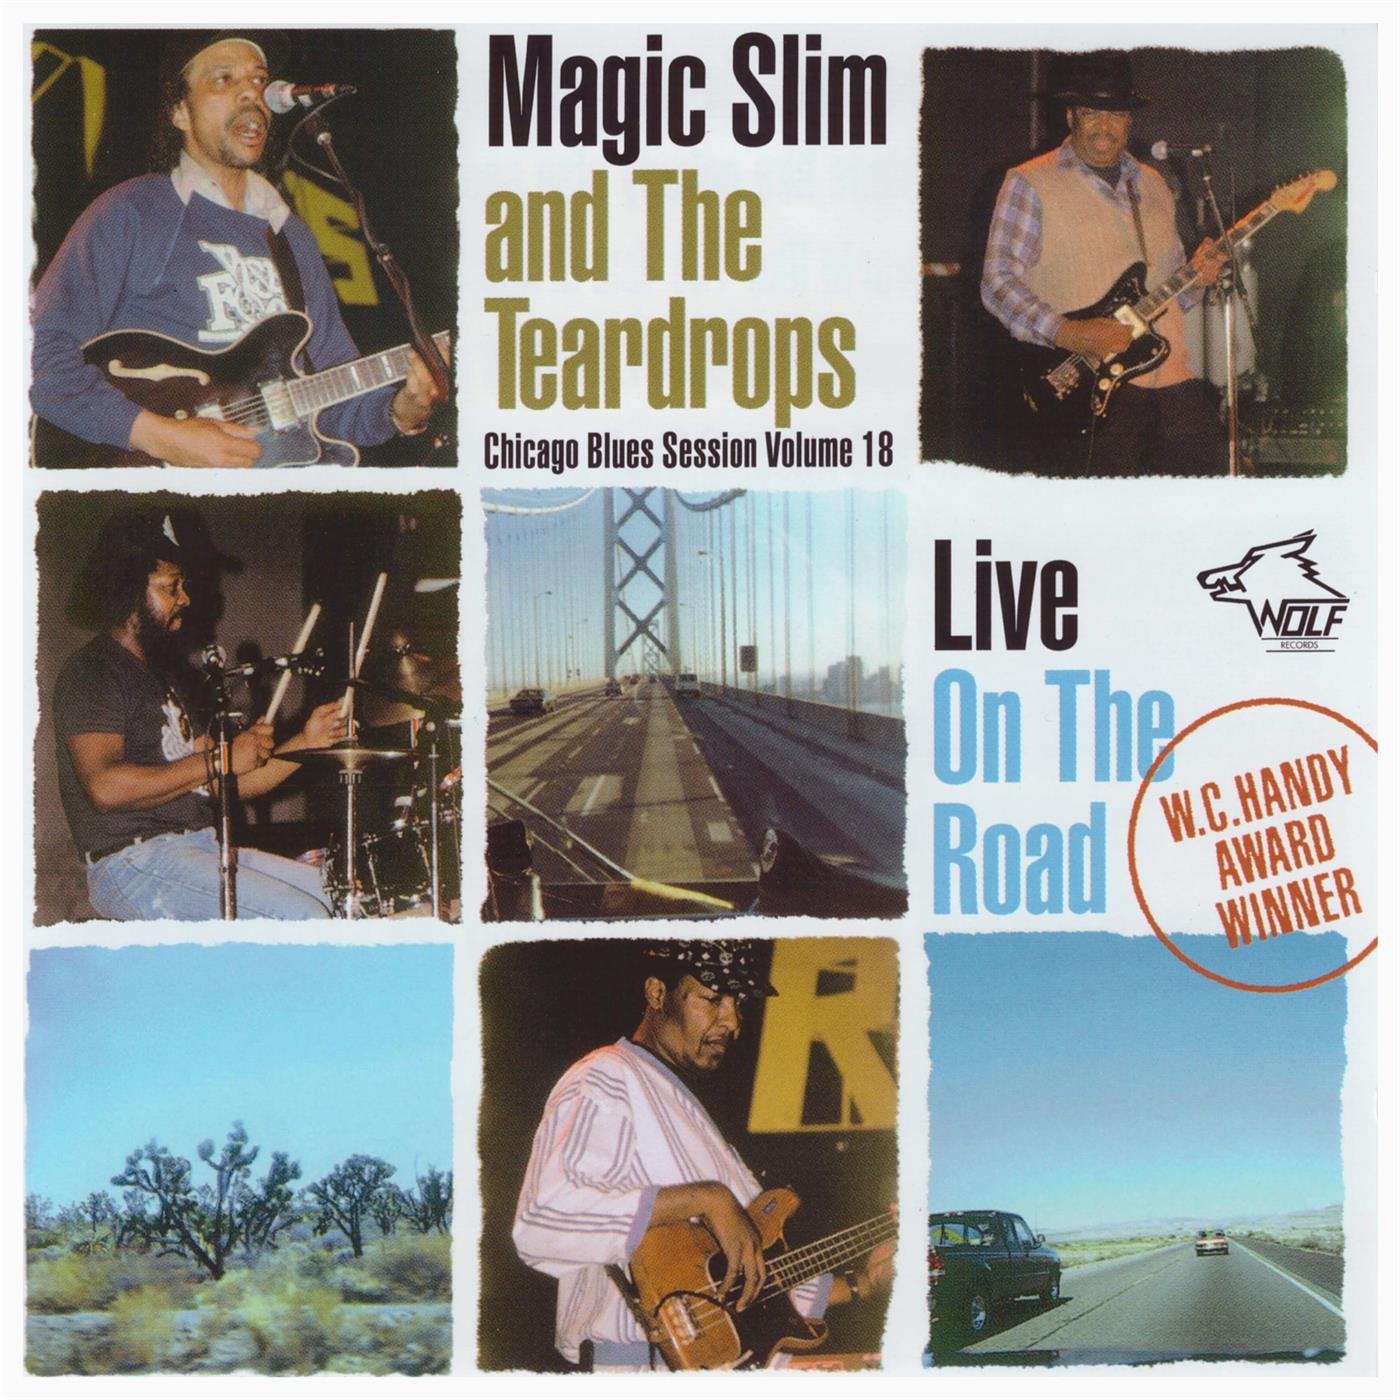 Magic Slim and The Teardrops - Live On The Road (Reissue) (2015) FLAC Download